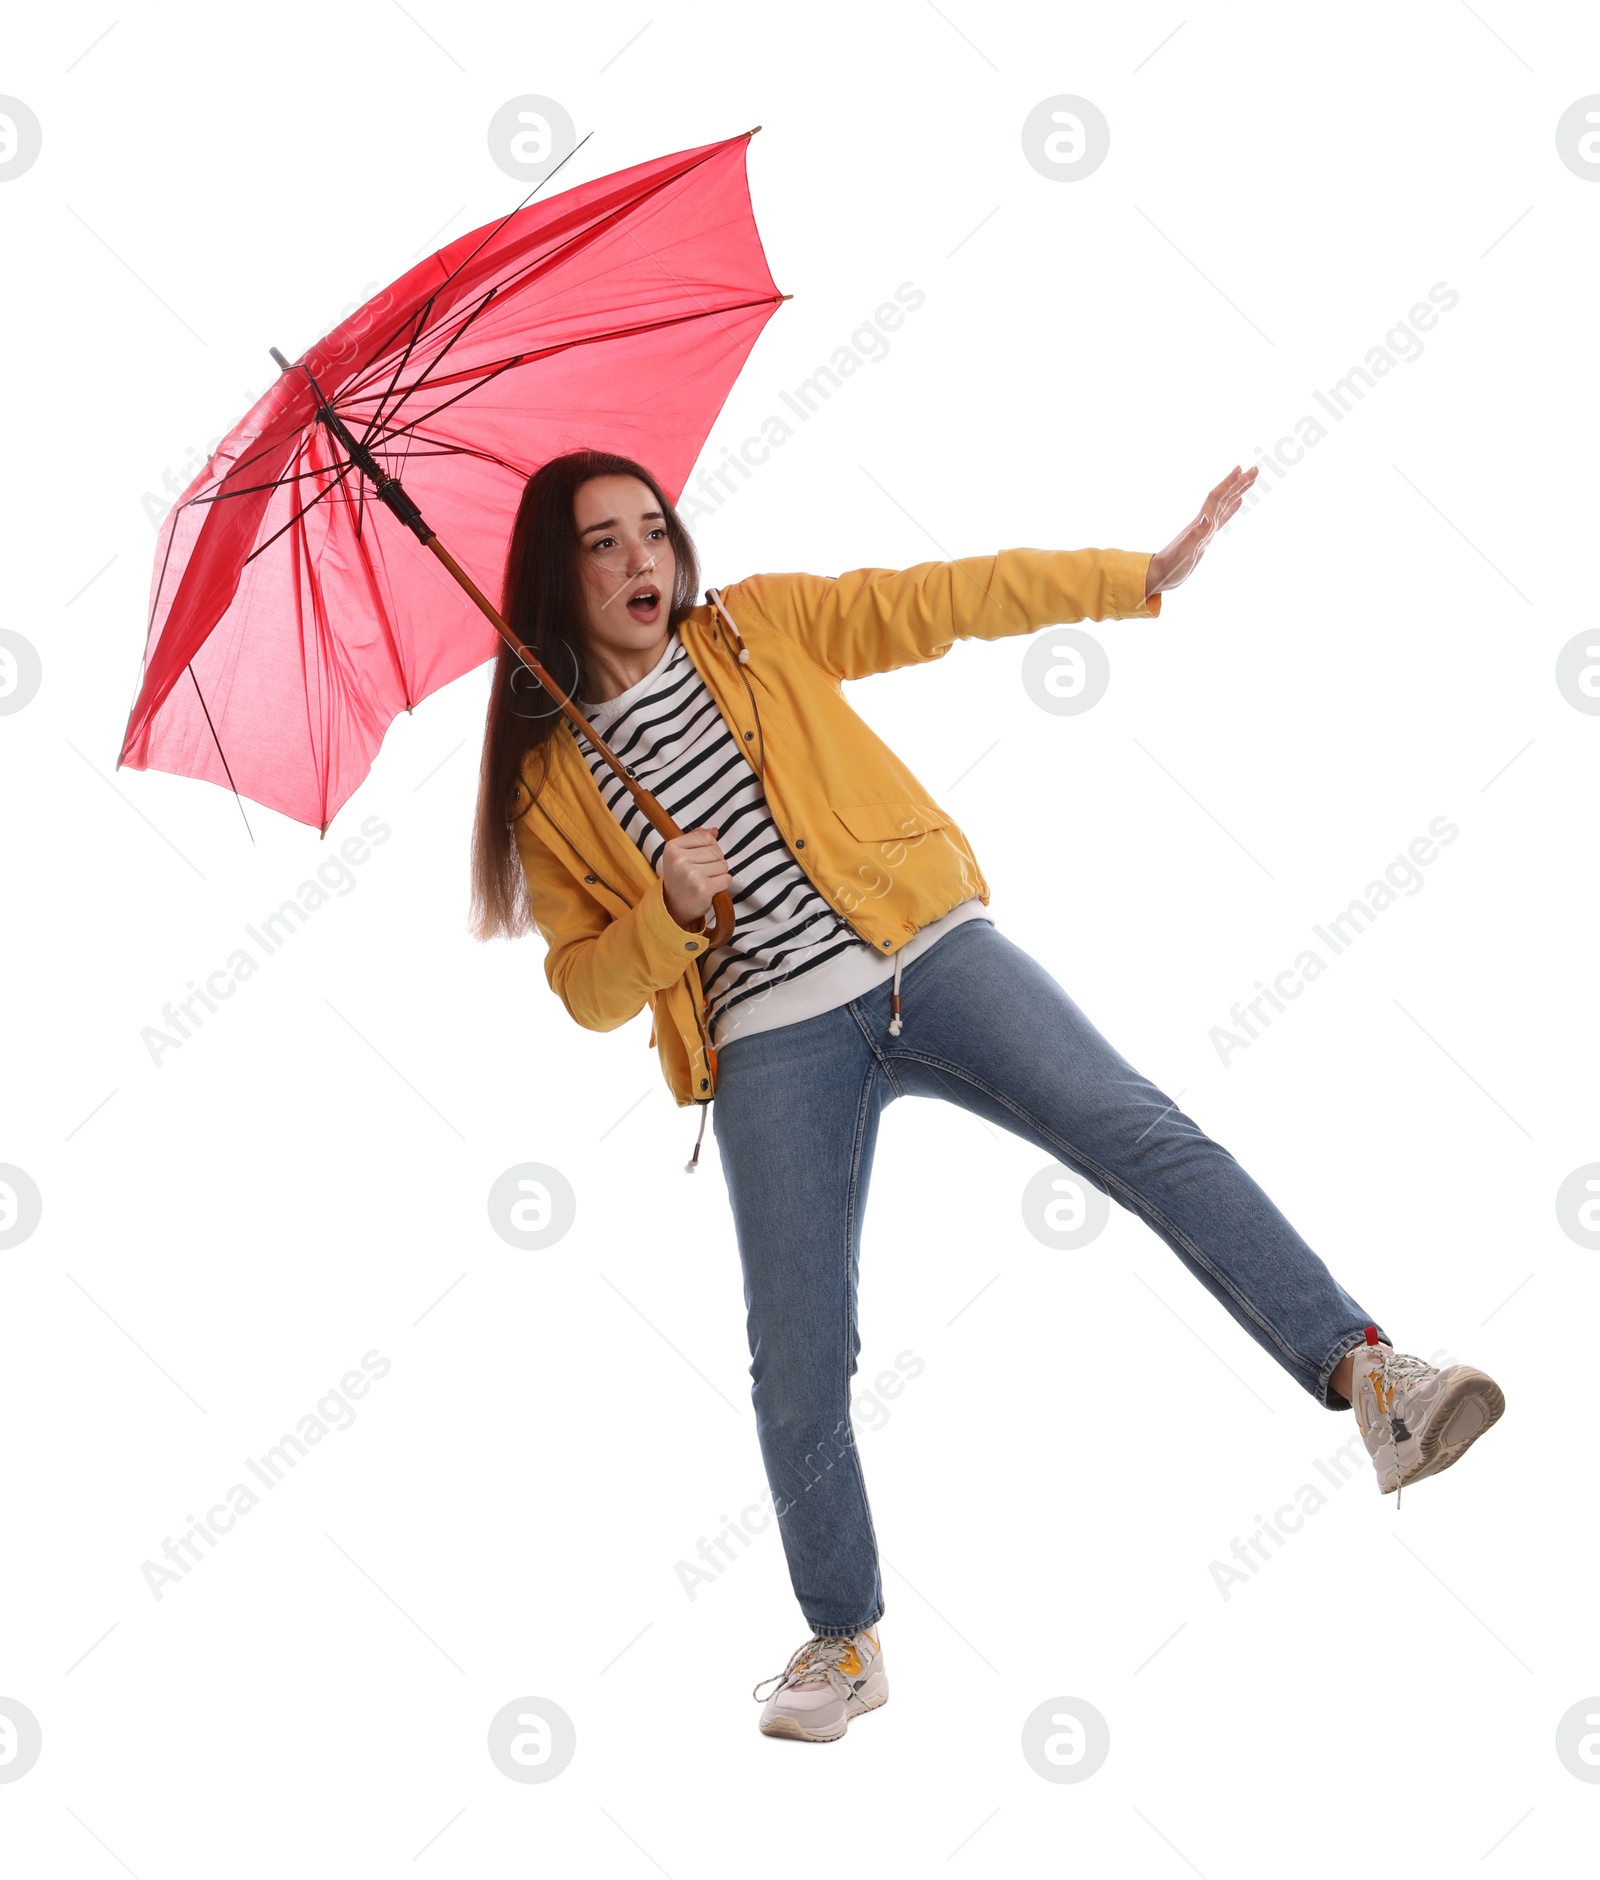 Photo of Emotional woman with umbrella caught in gust of wind on white background